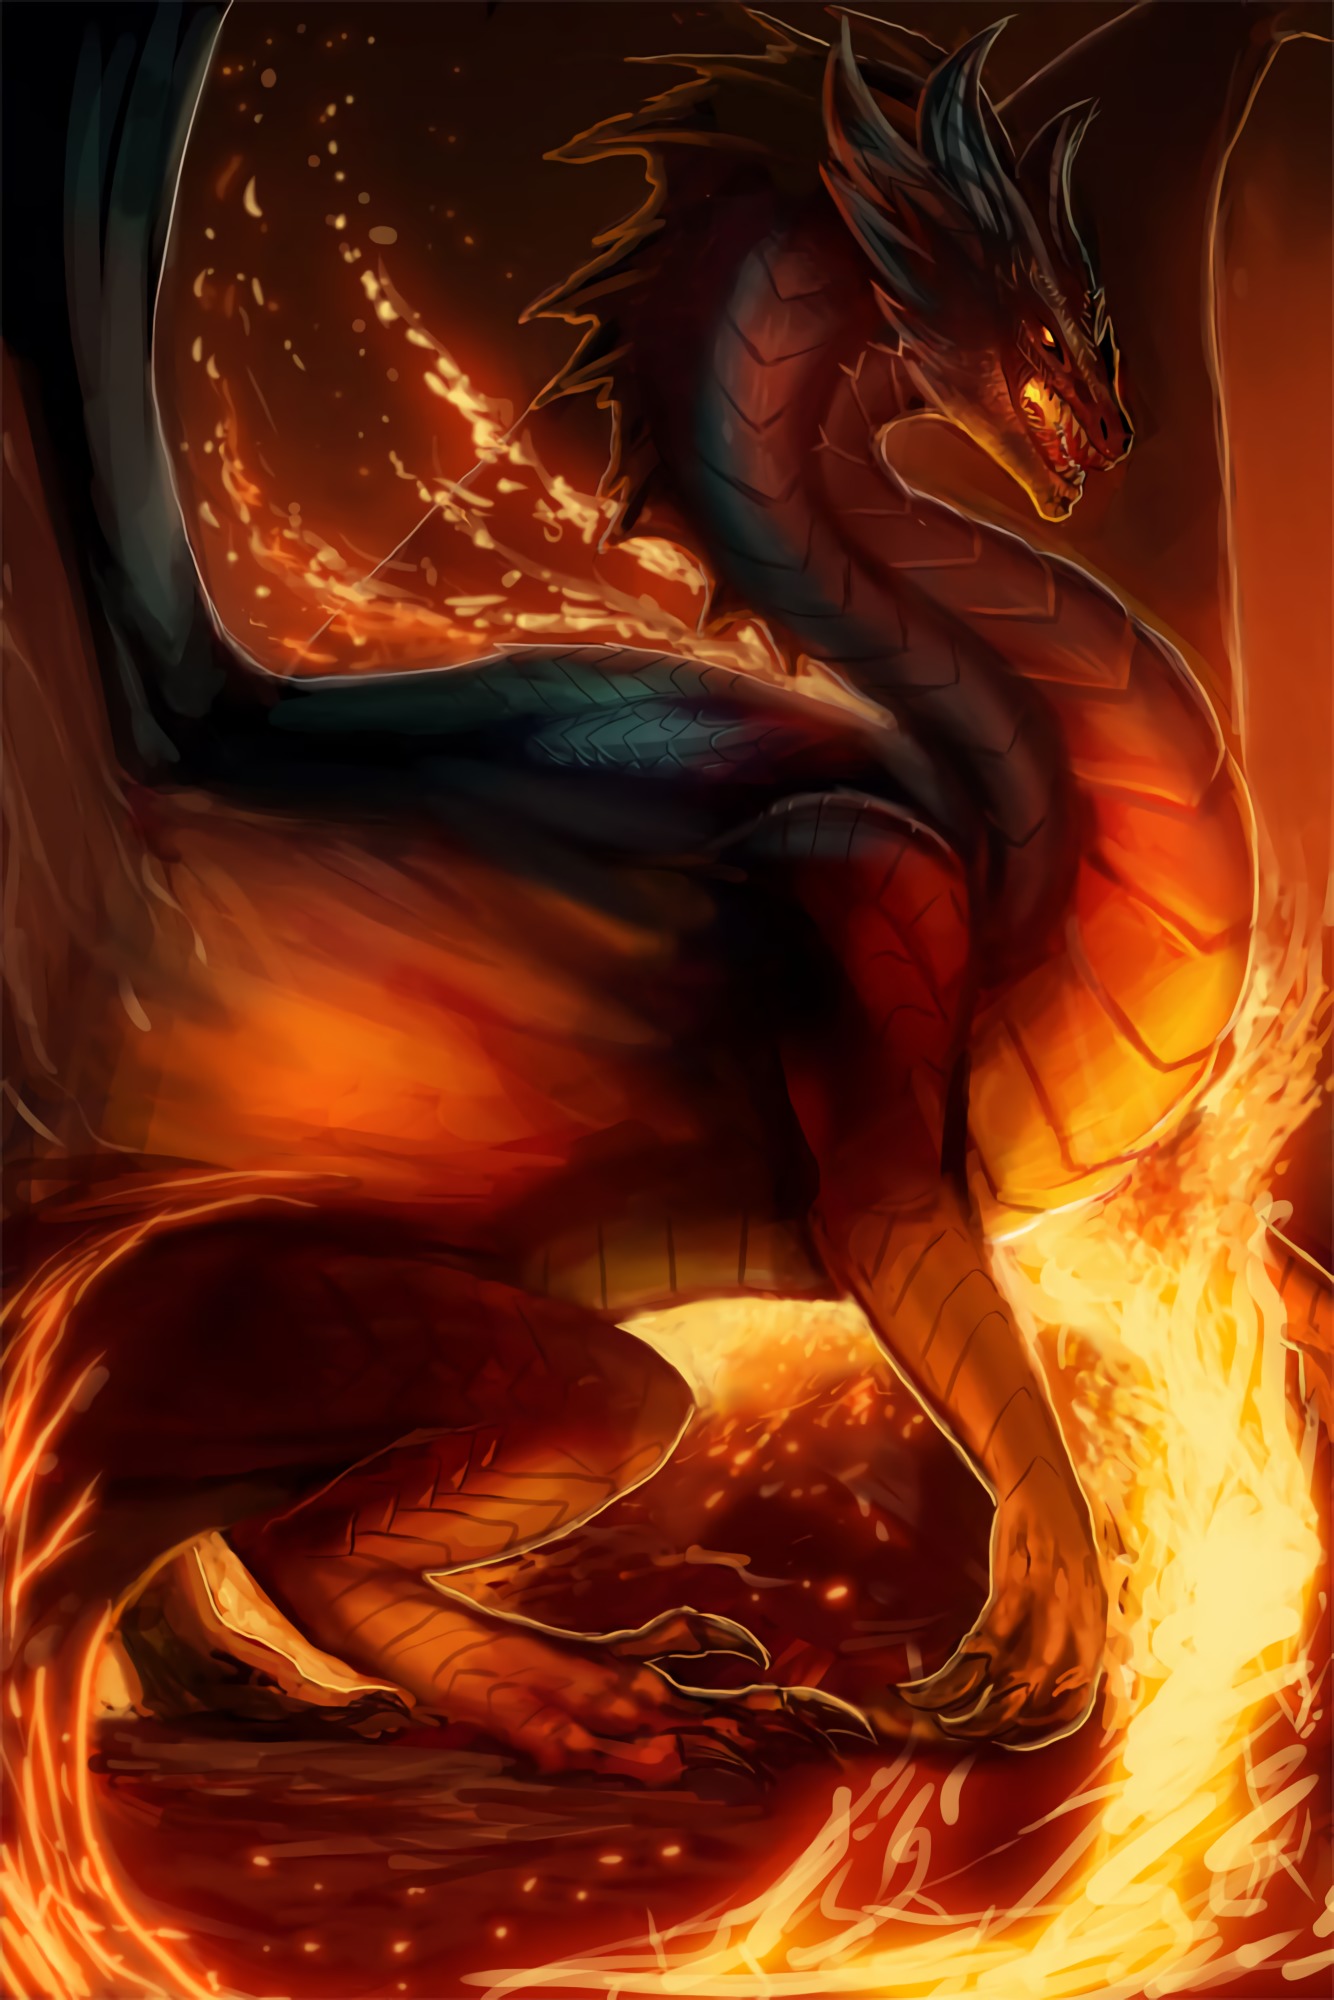 android dragon, art, fire, being, creature, fiction, that's incredible